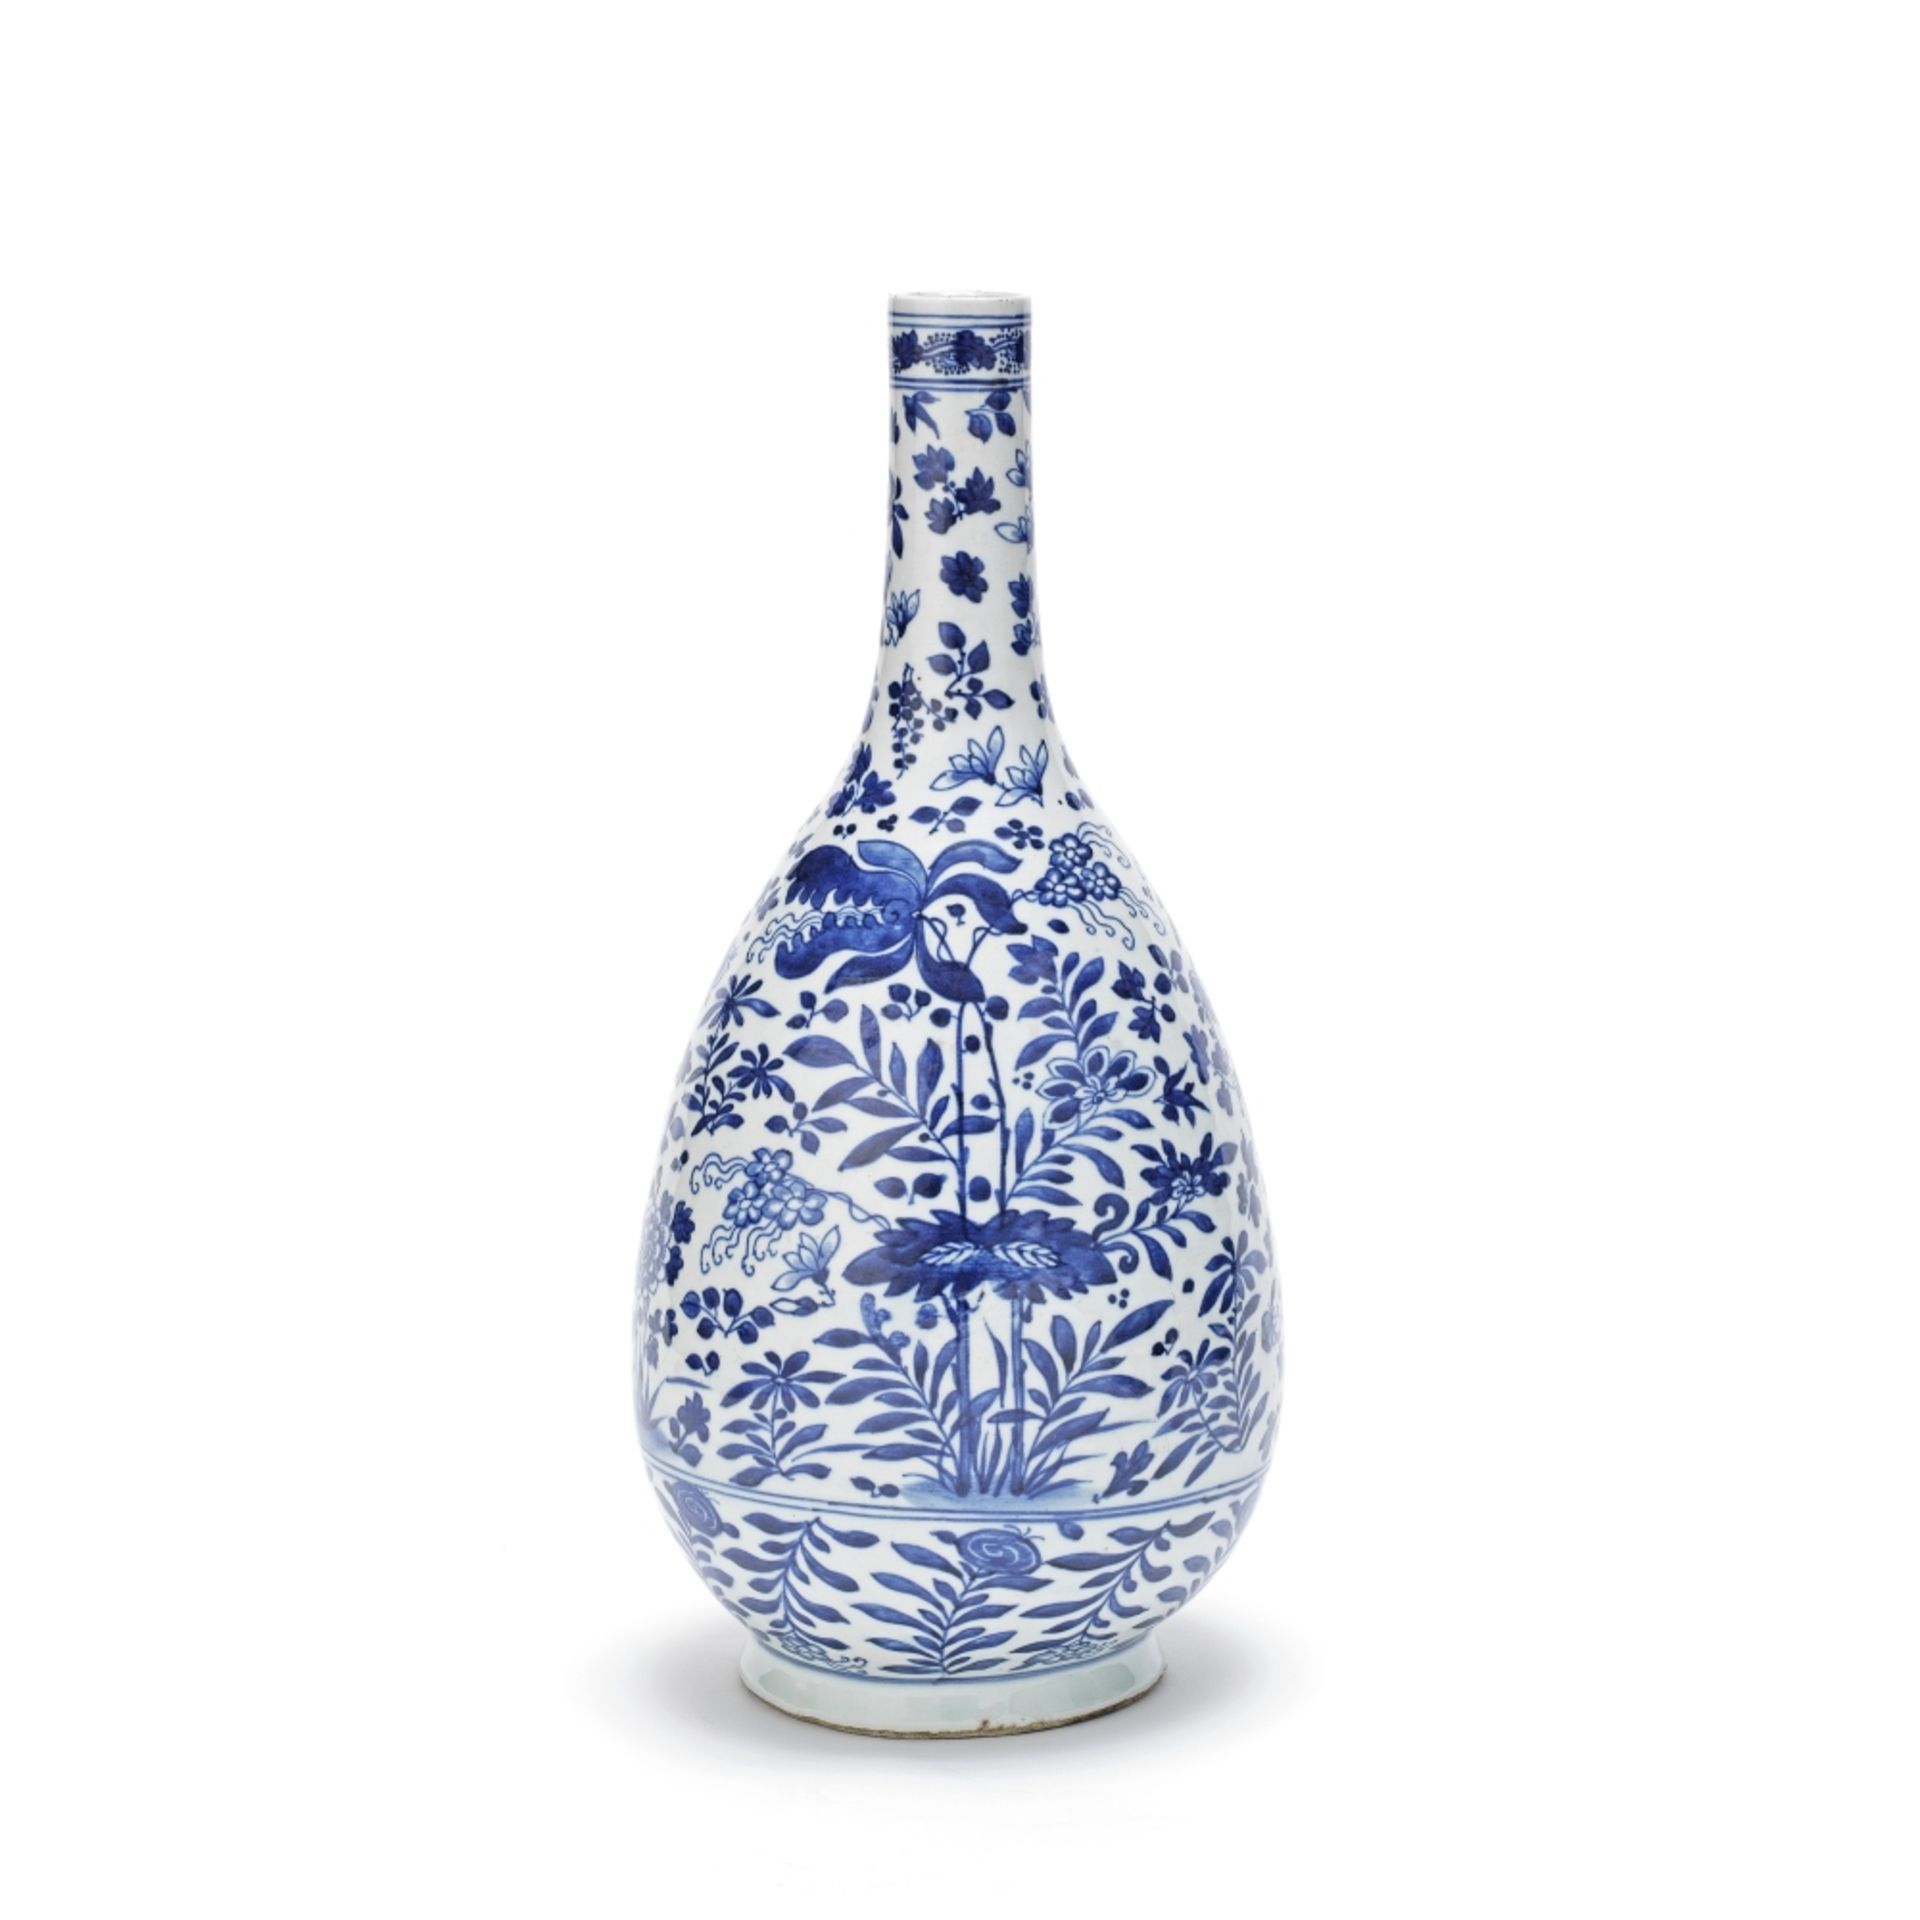 A LARGE BLUE AND WHITE BOTTLE VASE 19th century